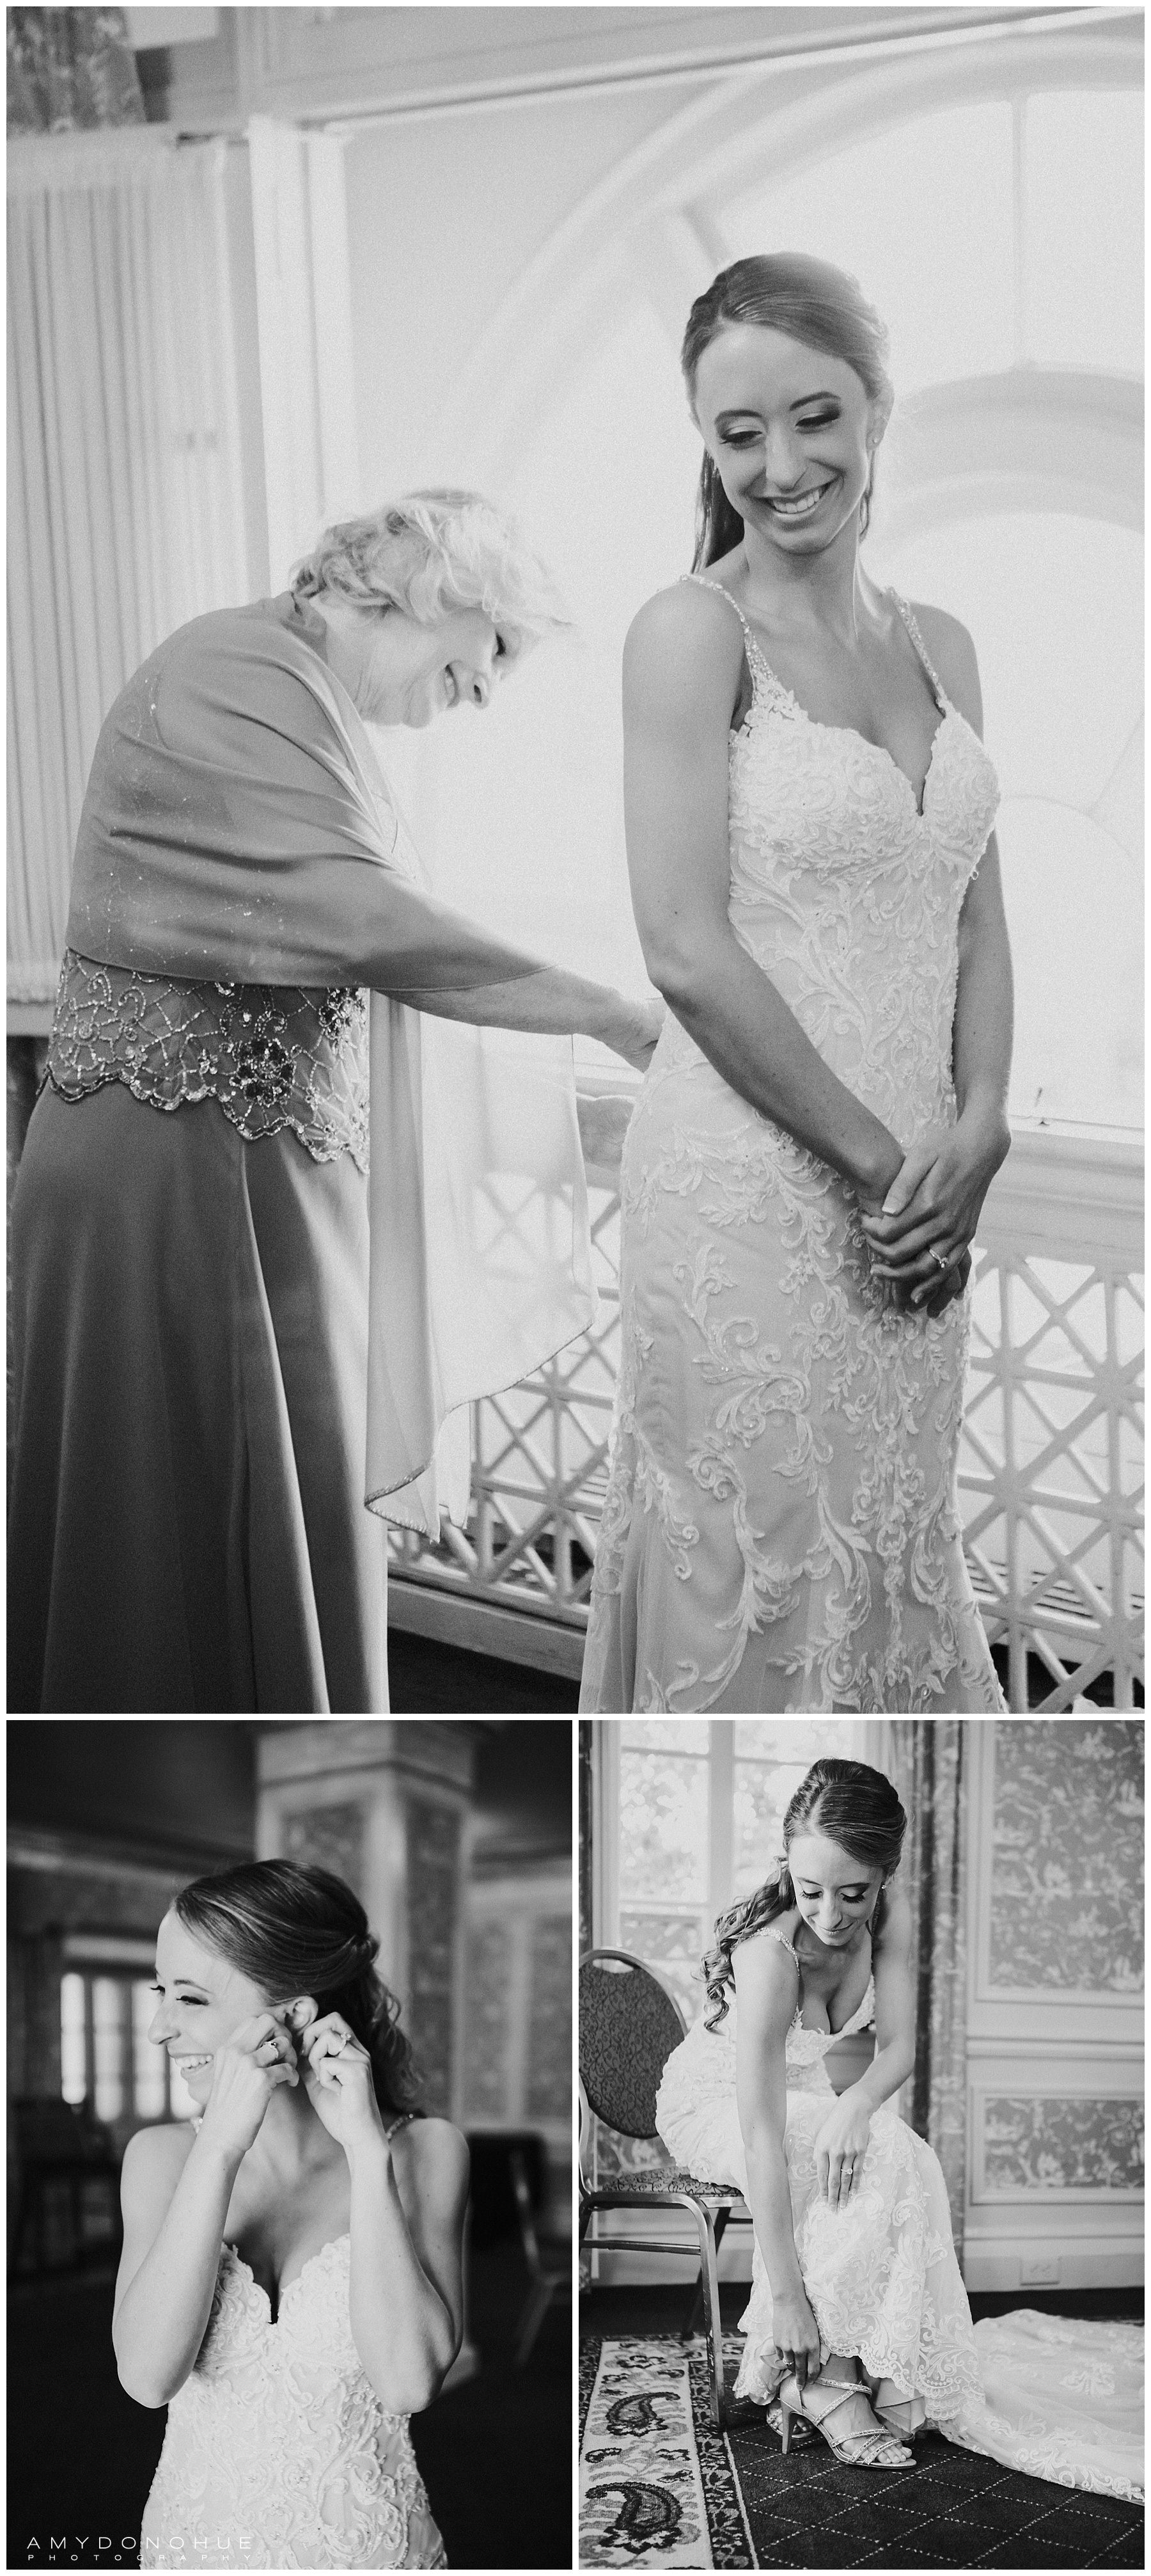 Getting Ready Details | Louisville, Kentucky Wedding Photographer | © Amy Donohue Photography